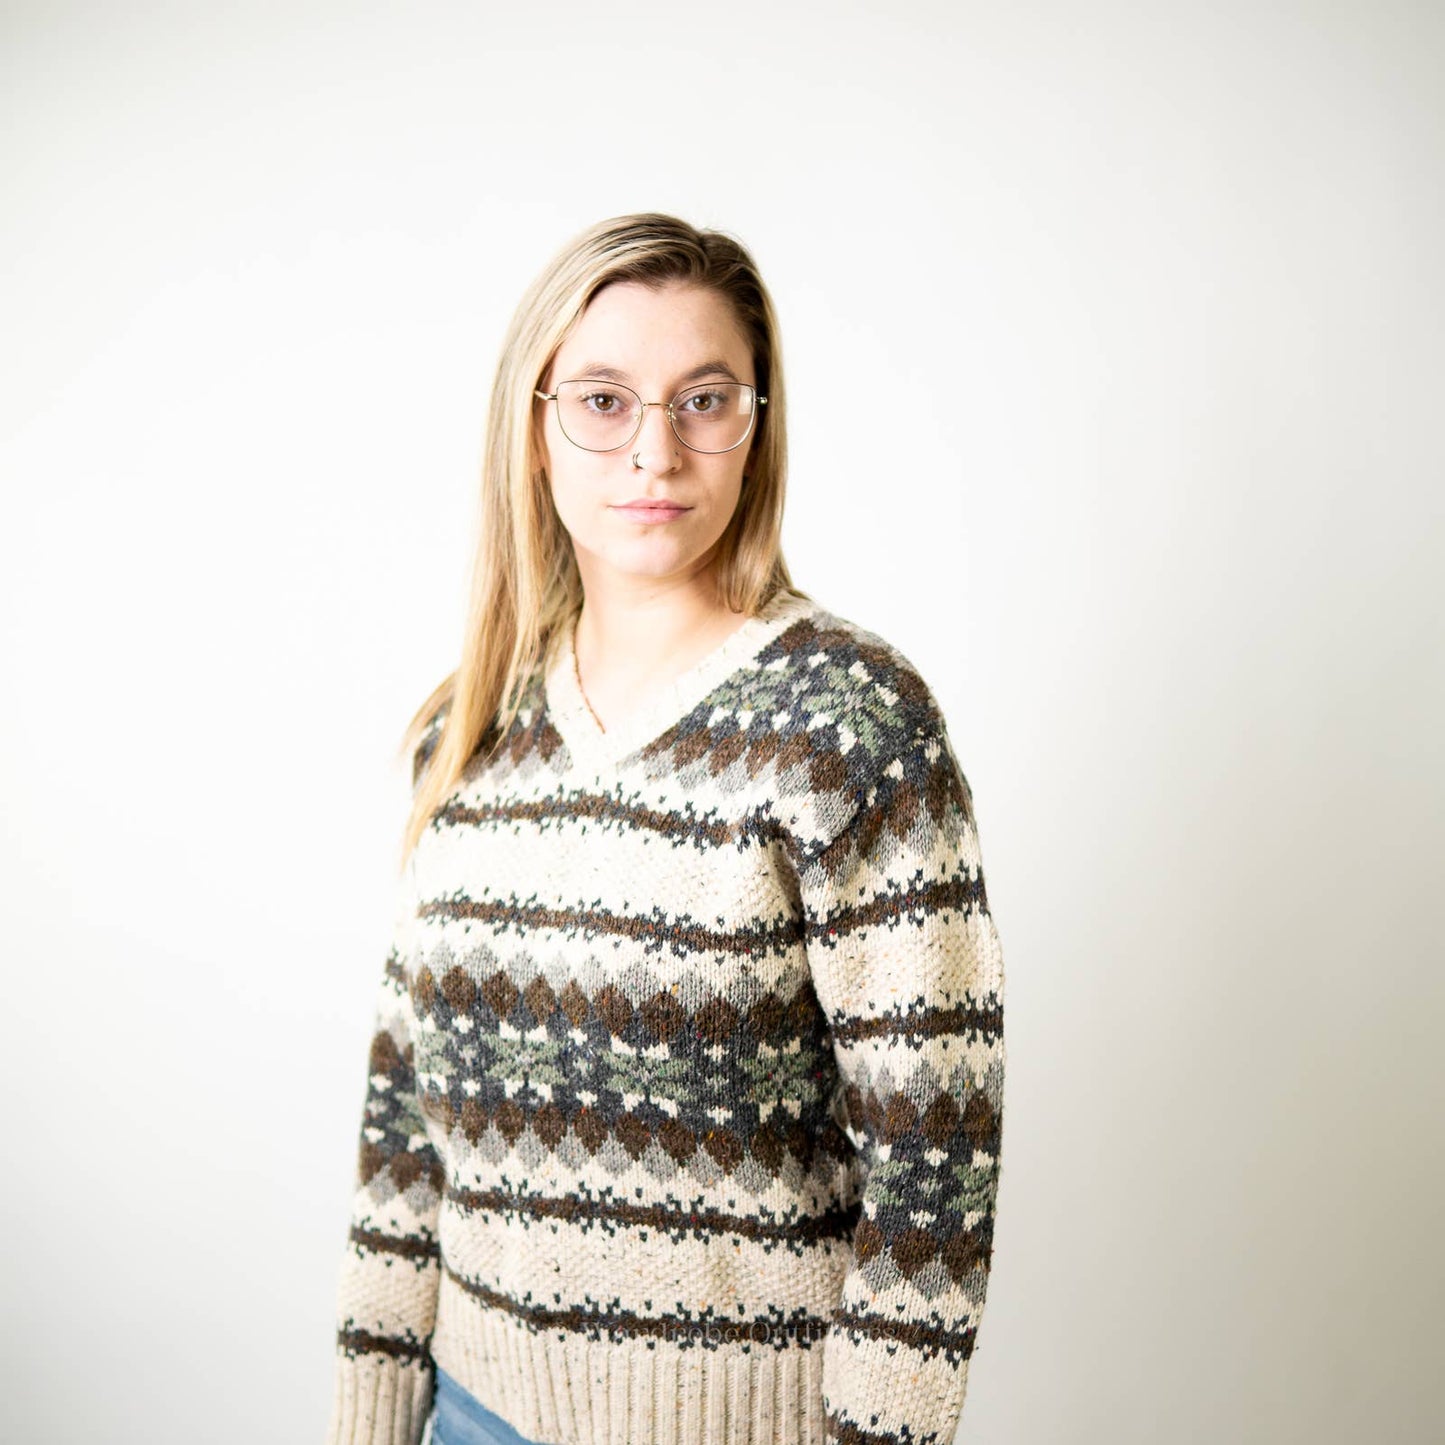 Vintage 90’s Chunky Knit Reference Point Sweater - S